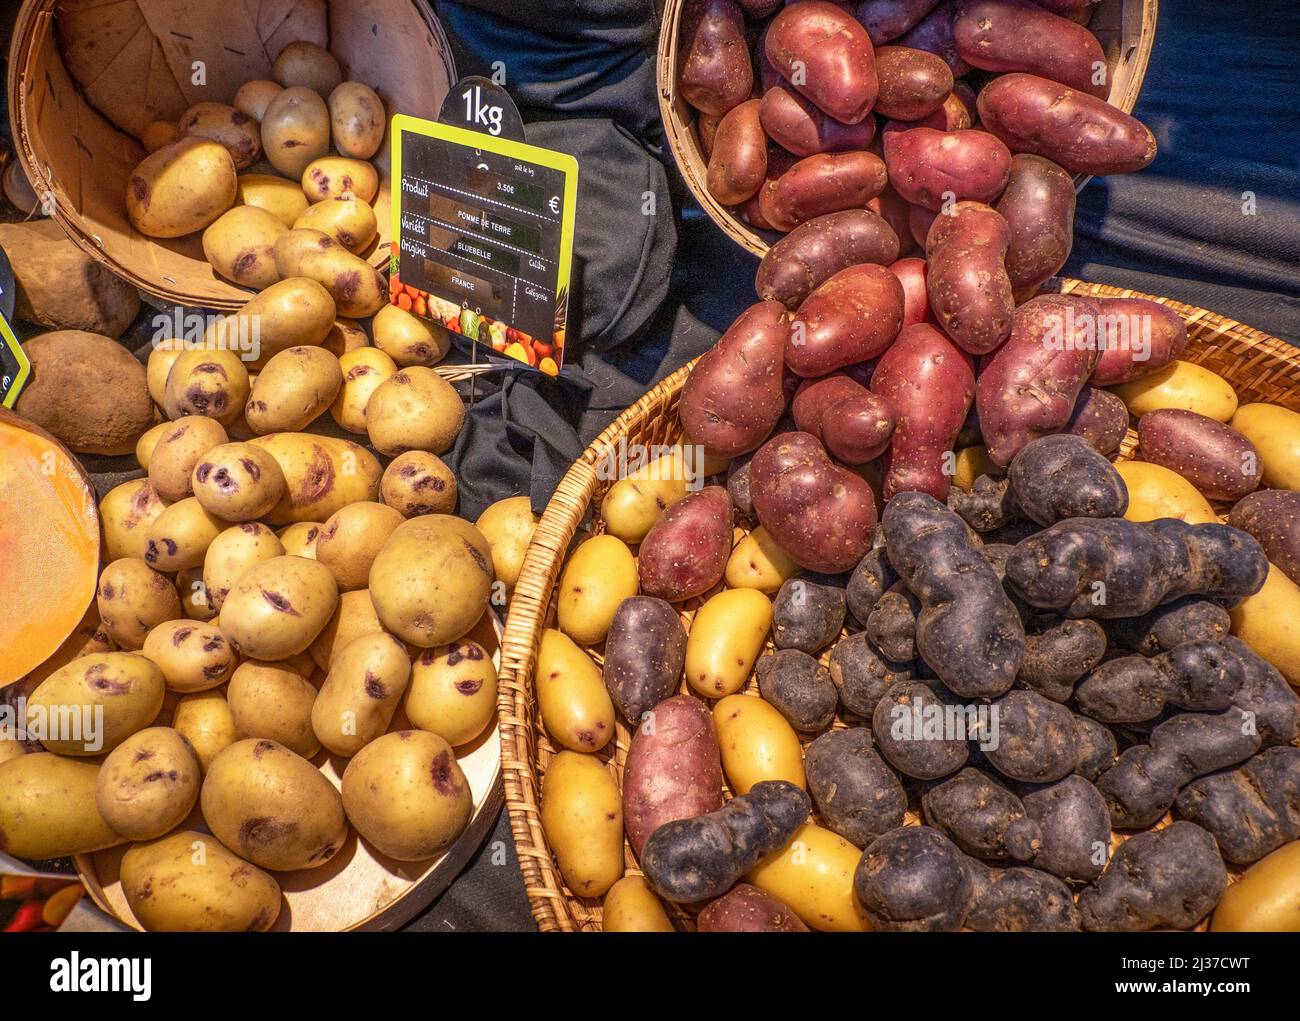 France-Food- different kinds of potatoes. Stock Photo